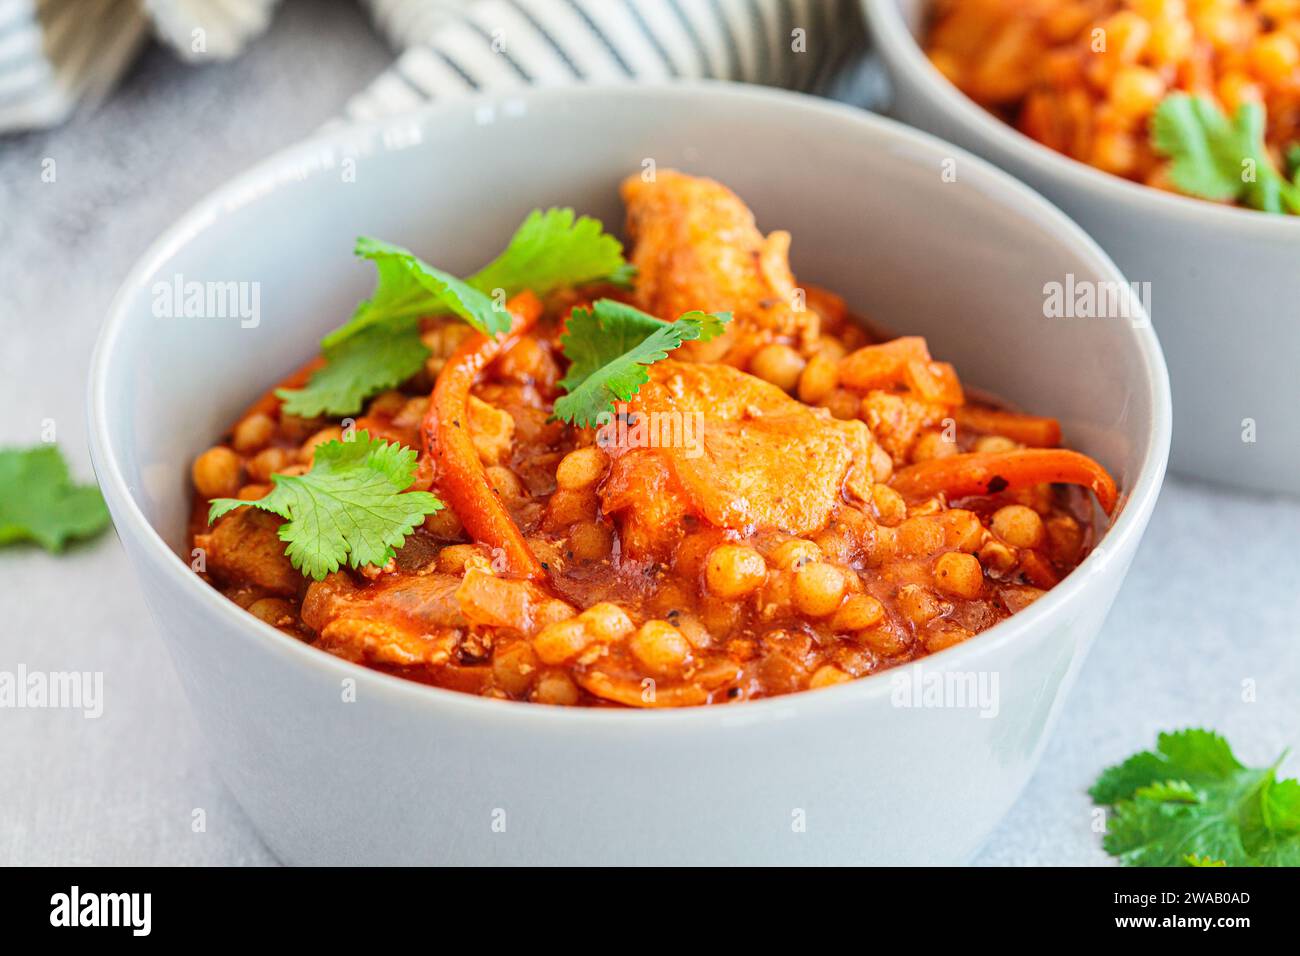 Ptitim stew with chicken and vegetables, close-up. Israeli traditional cuisine. Stock Photo